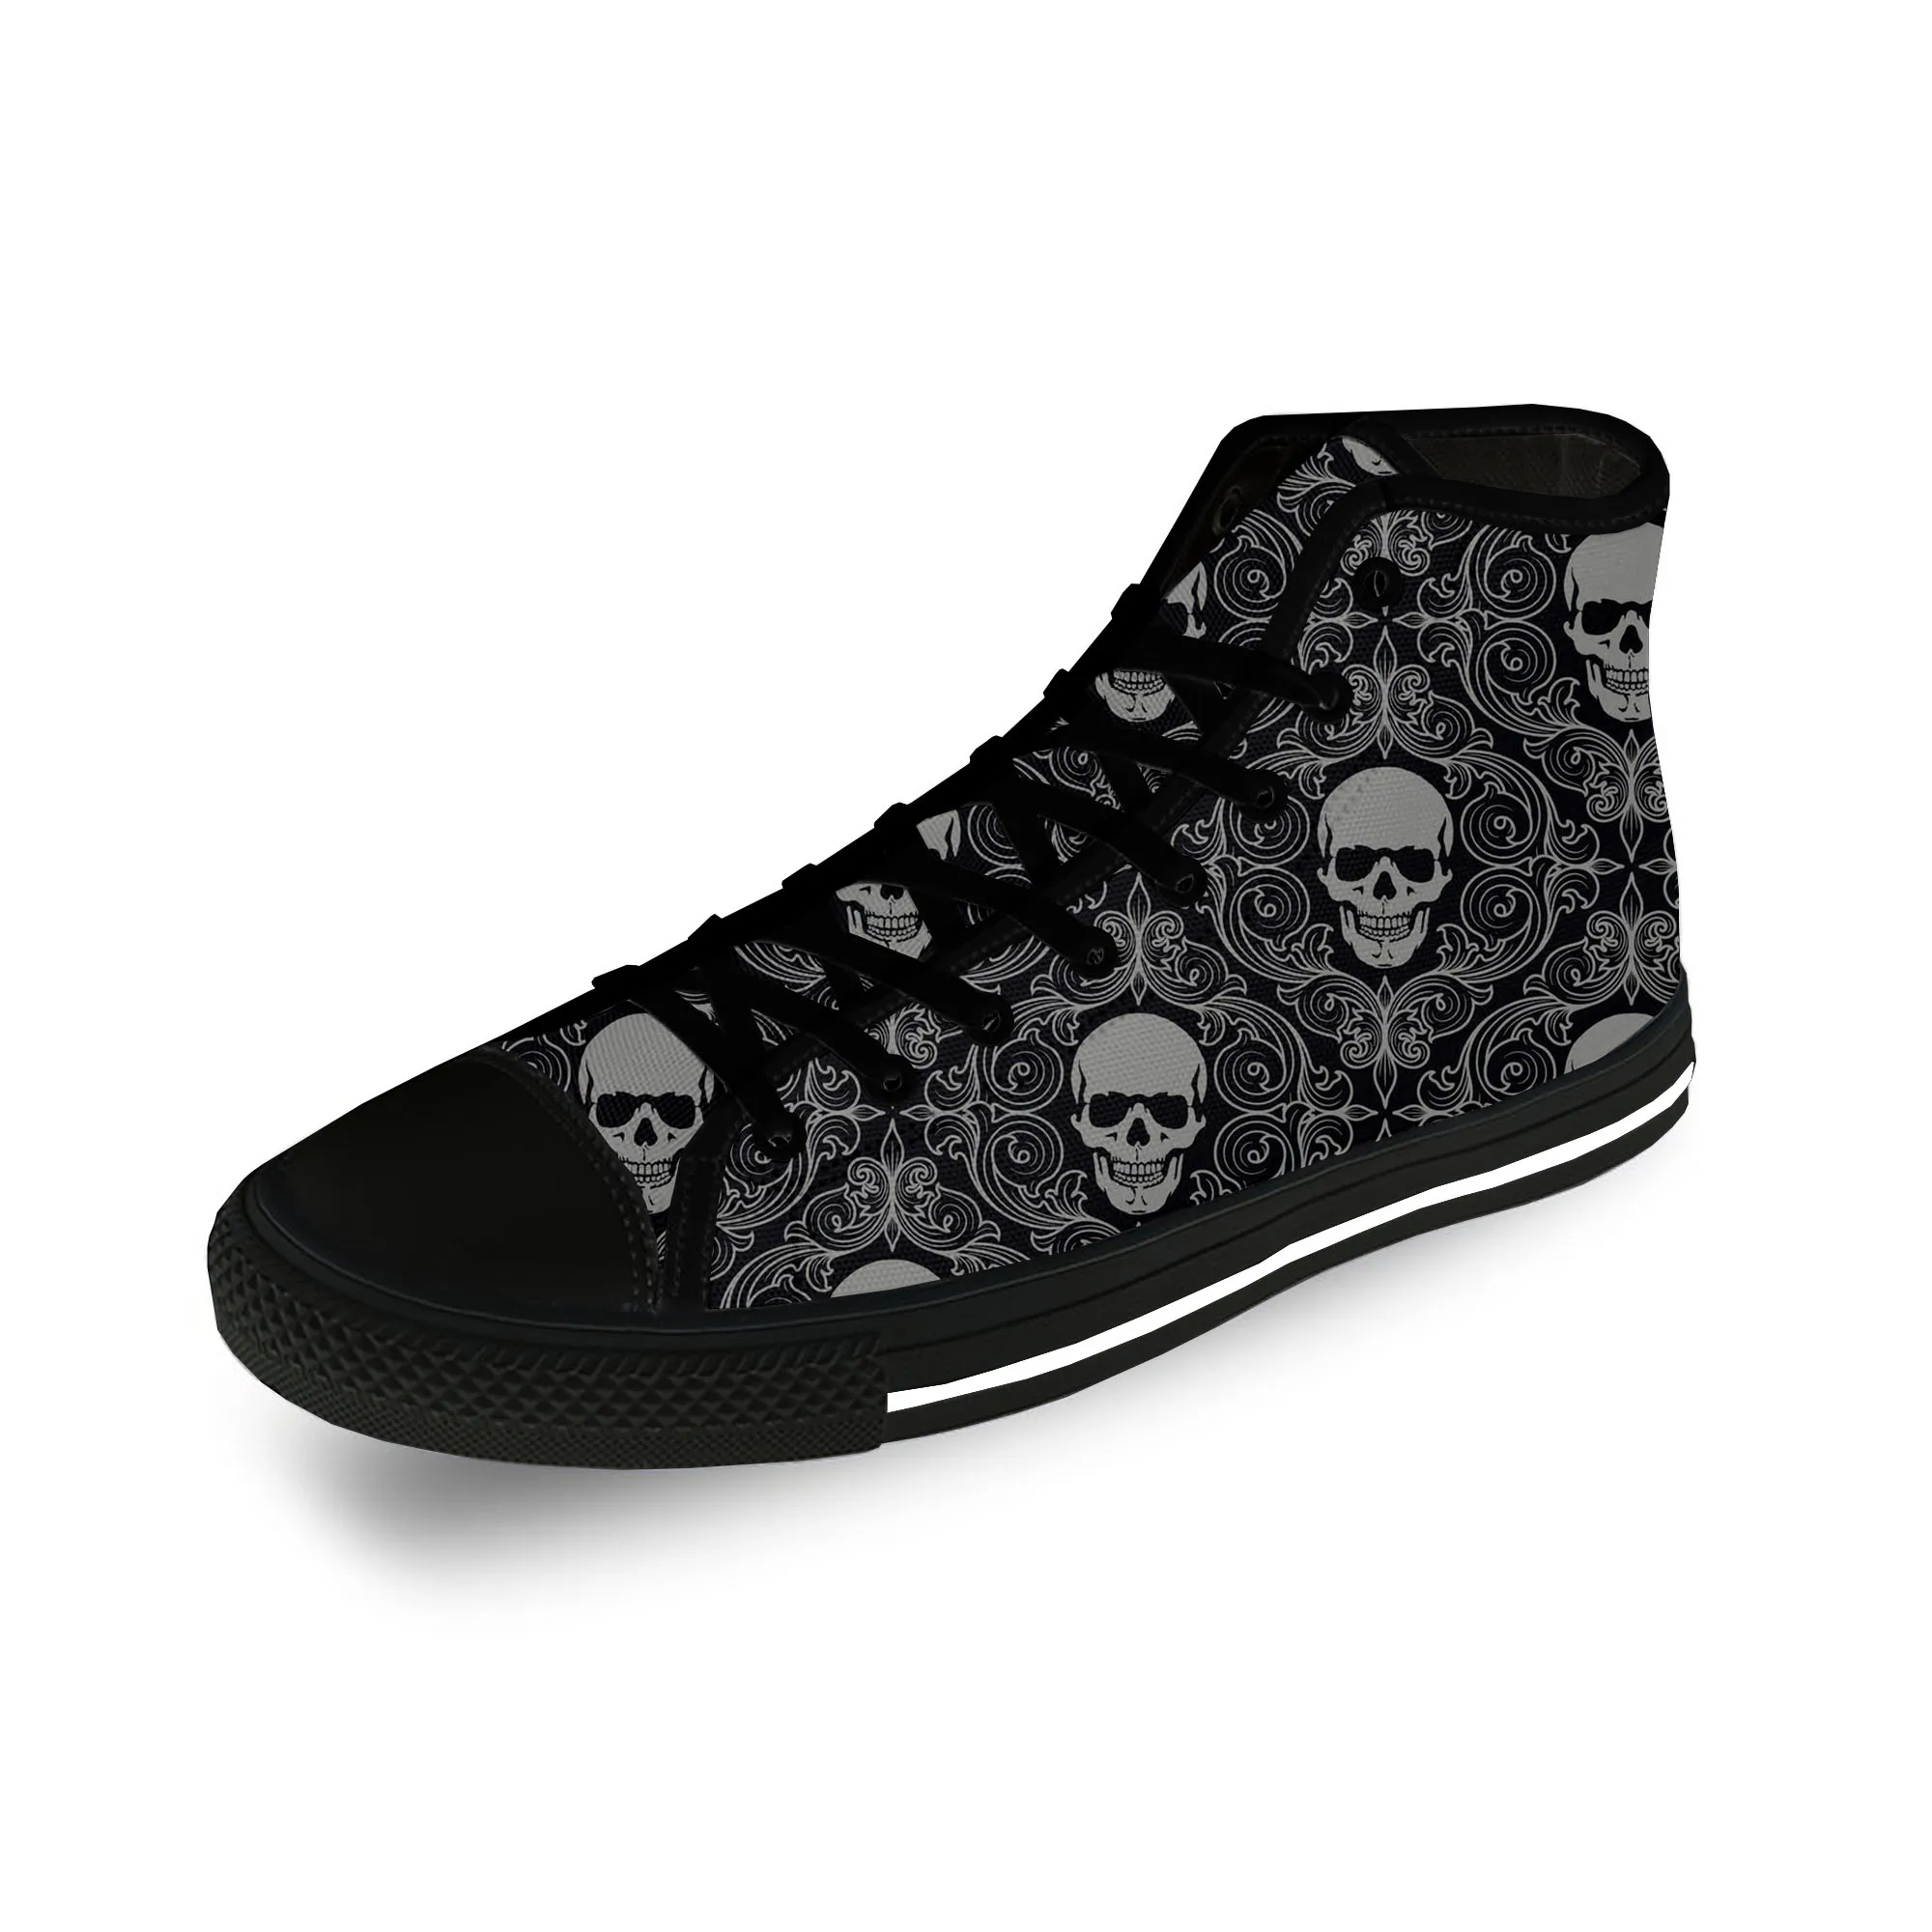 

SKull Skeleton PAisley Horror Halloween Casual Cloth 3D Print High Top Canvas Fashion Shoes Men Women Breathable Sneakers